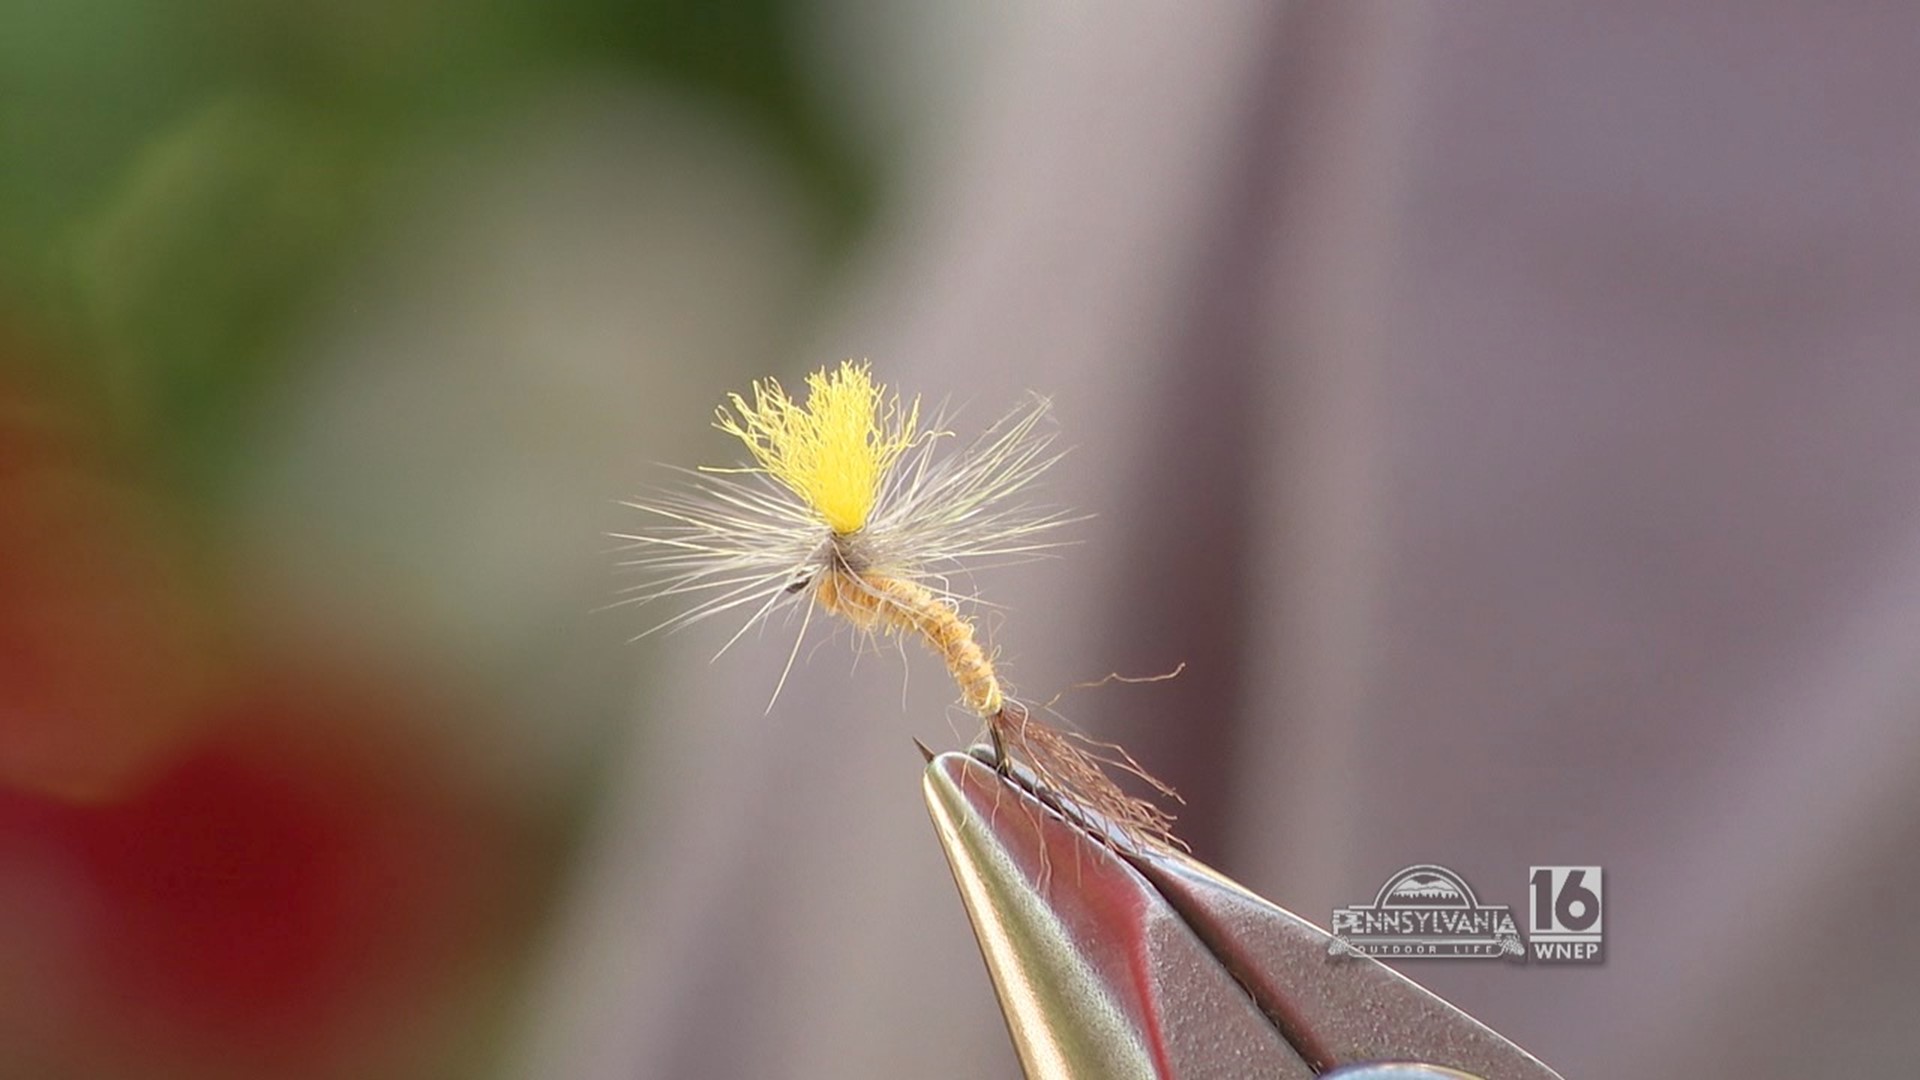 A dry fly that's sure to catch you fish.